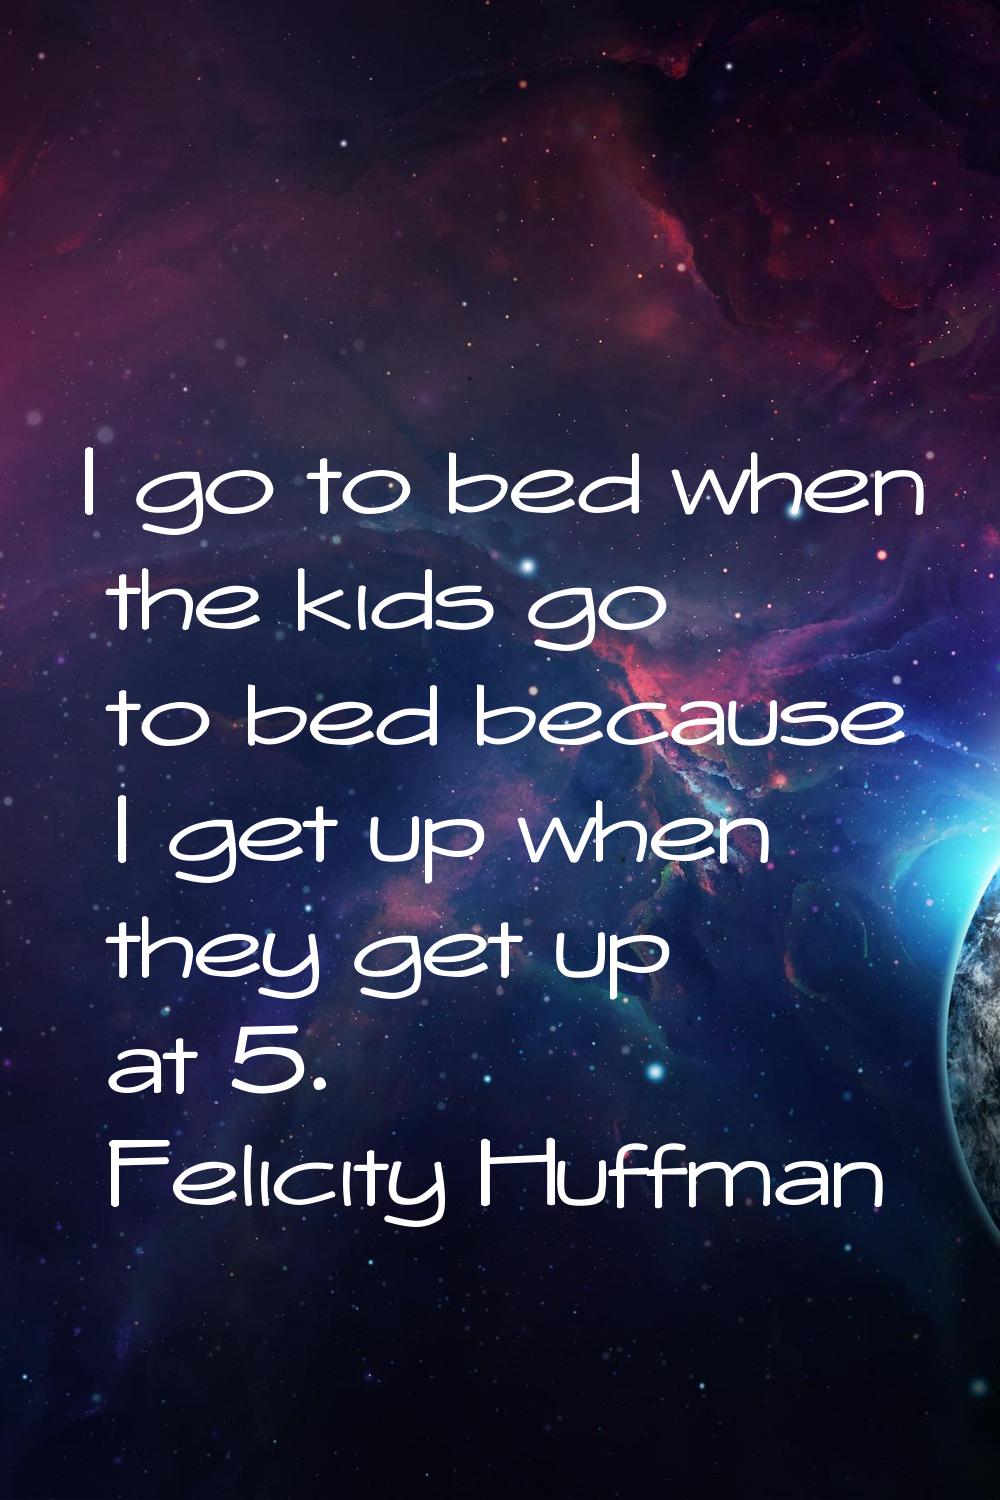 I go to bed when the kids go to bed because I get up when they get up at 5.